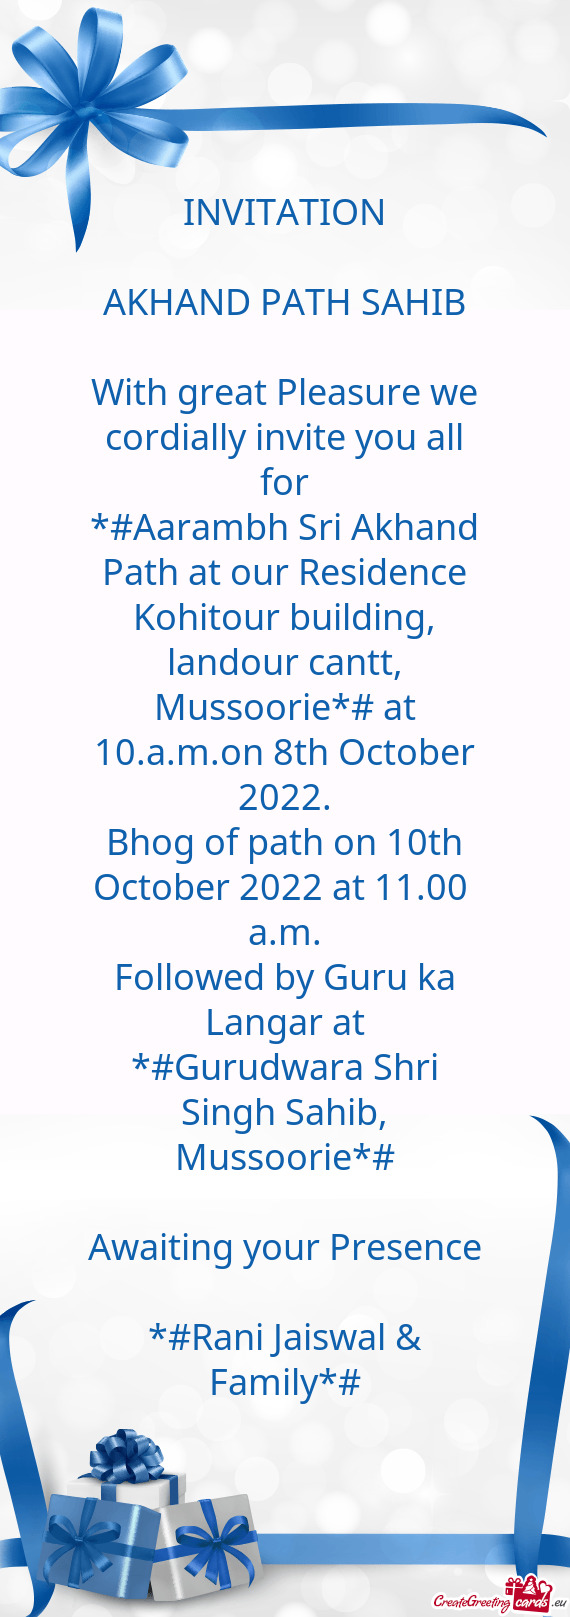 #Aarambh Sri Akhand Path at our Residence Kohitour building, landour cantt, Mussoorie*# at 10.a.m.o